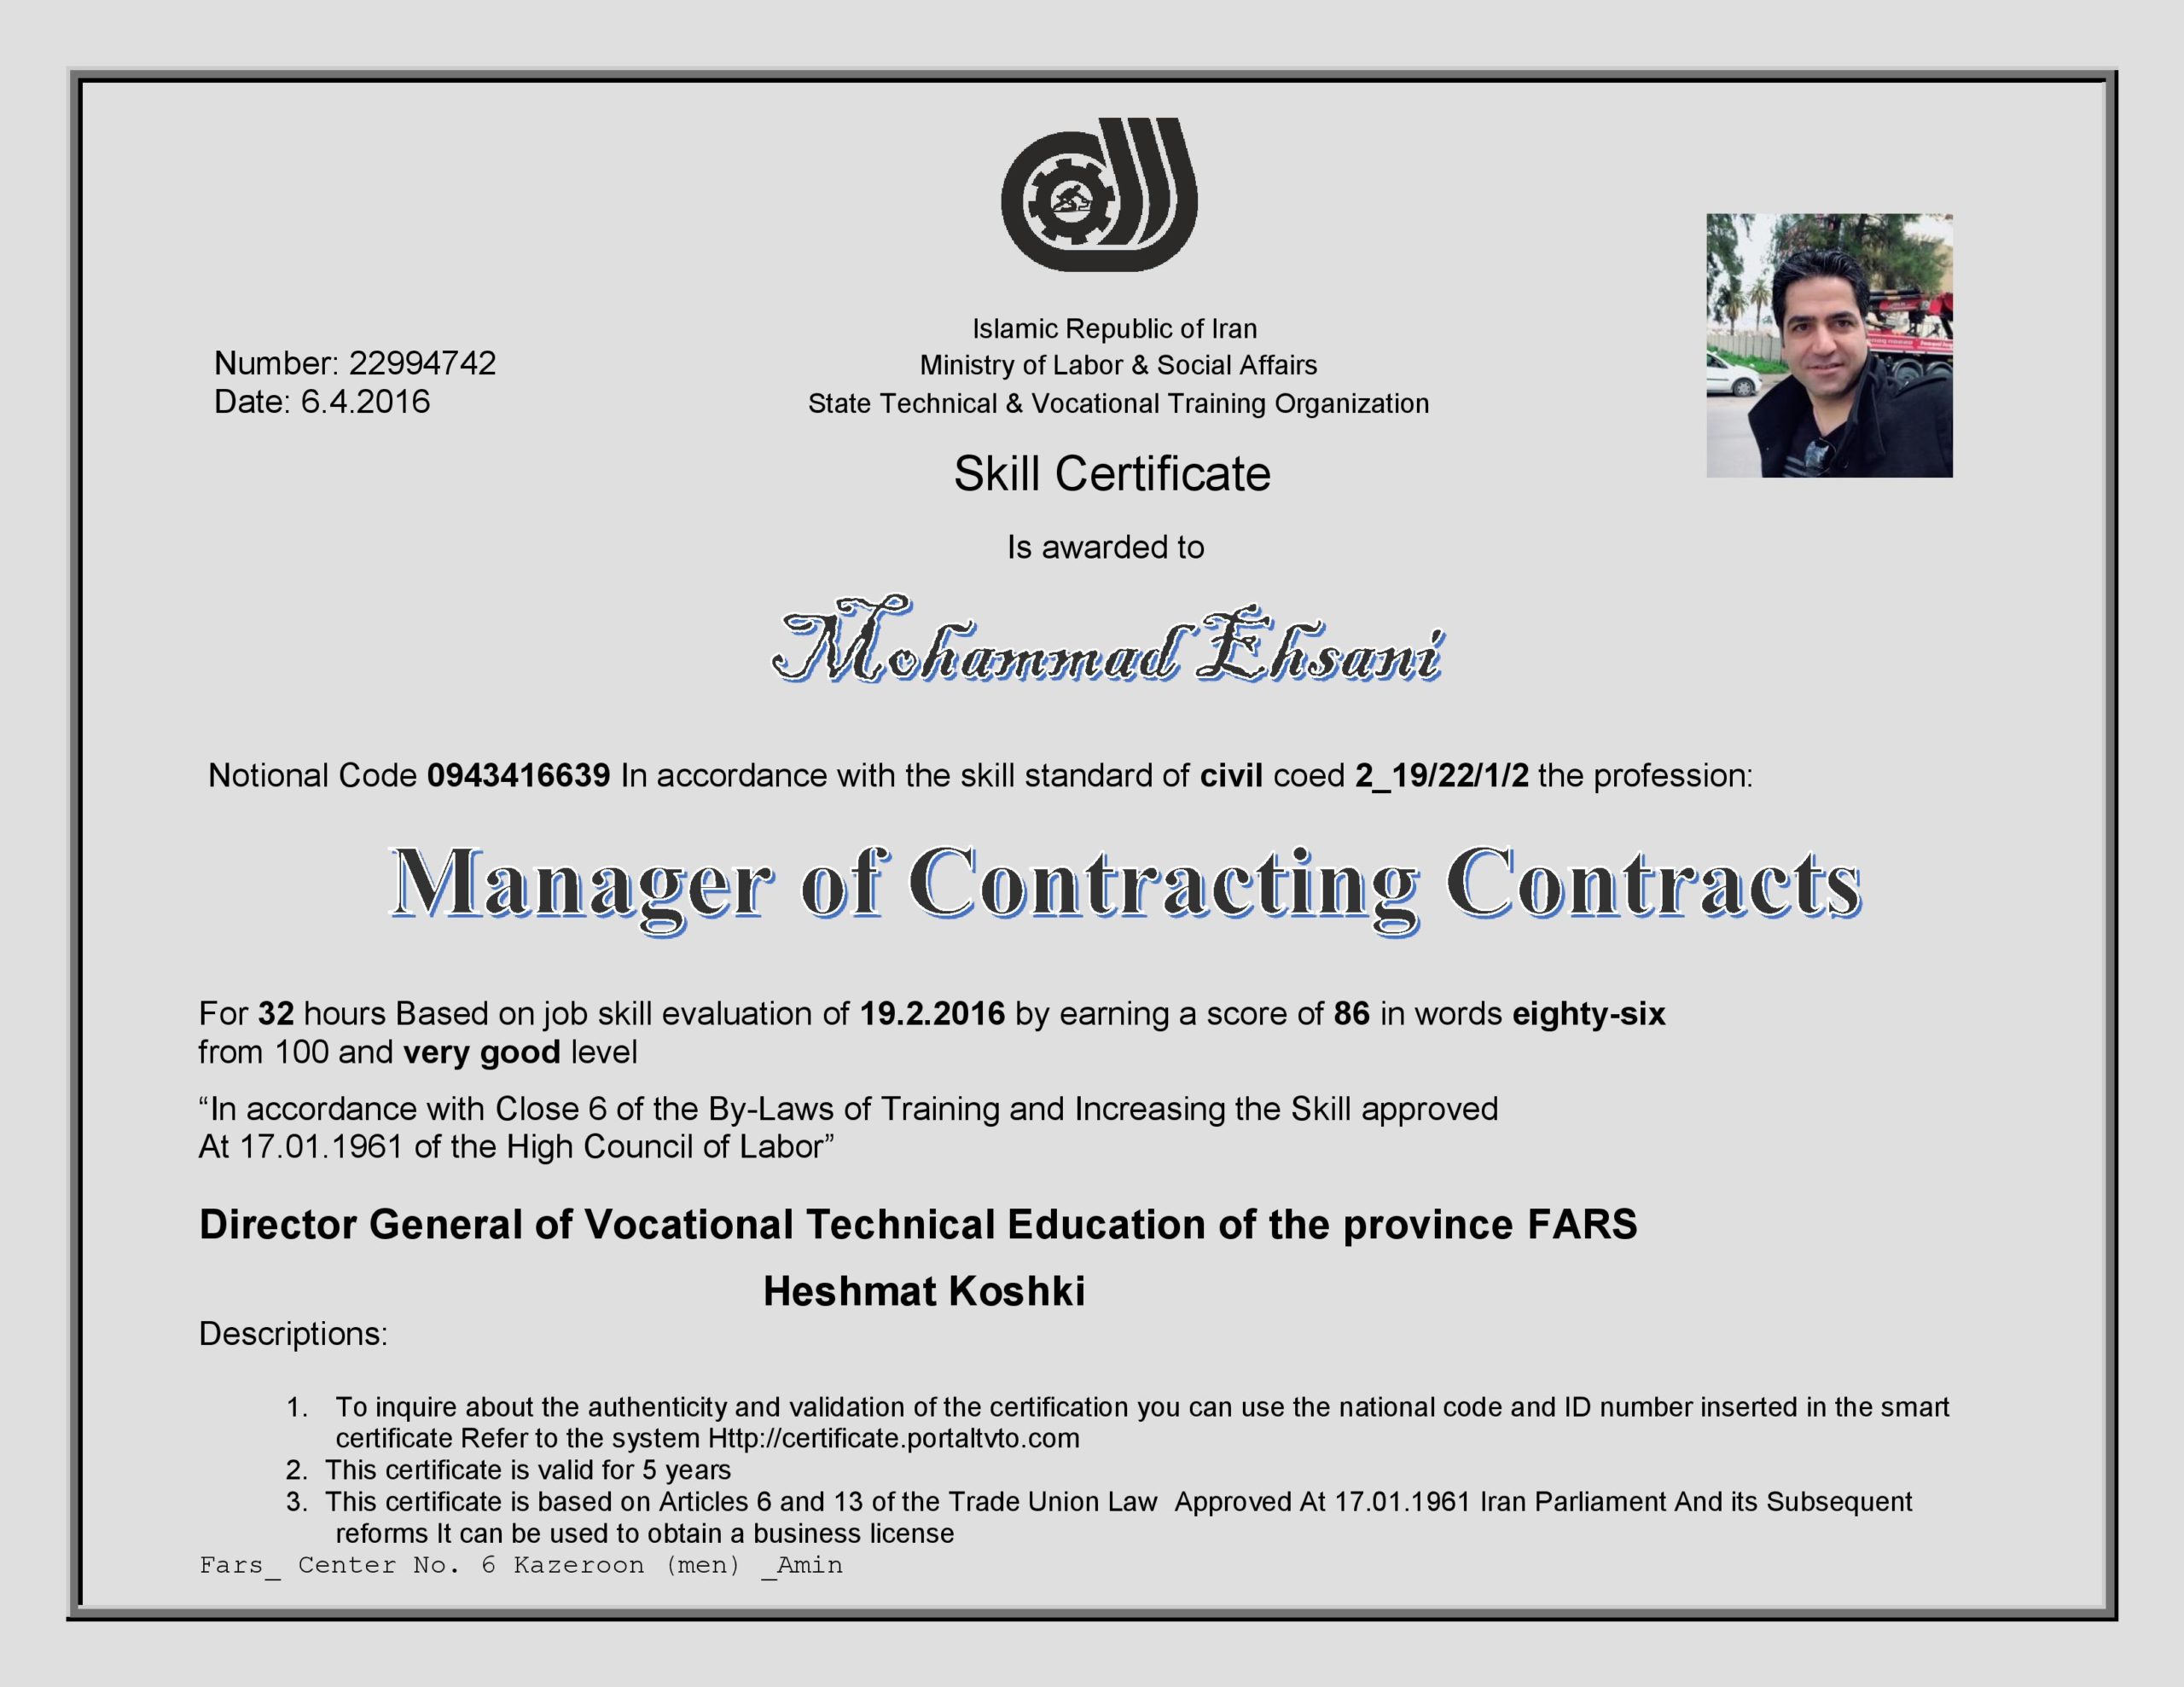 Mohammad Ehsani - Manager of Contracting Contracts